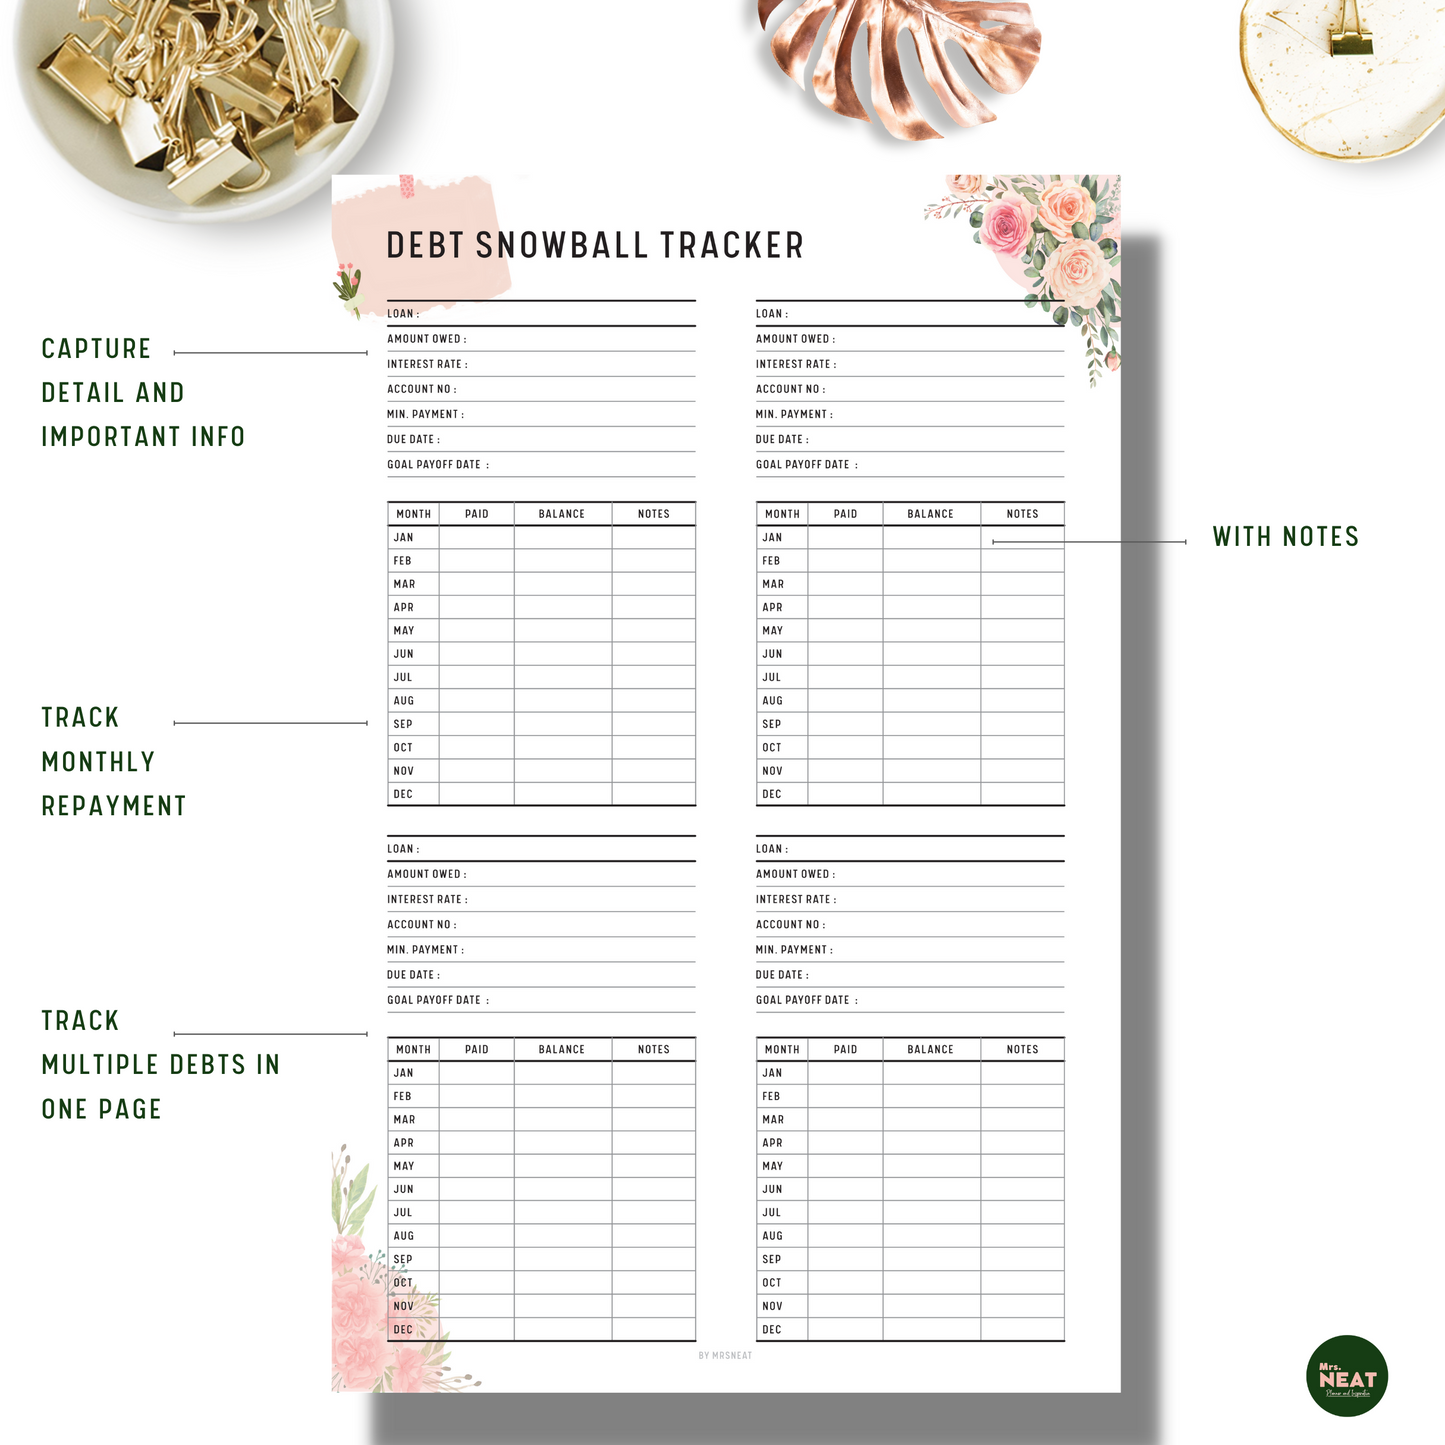 Floral Debt Snowball Tracker with room for monthly repayment, notes, capture debt info, multiple debts in one page